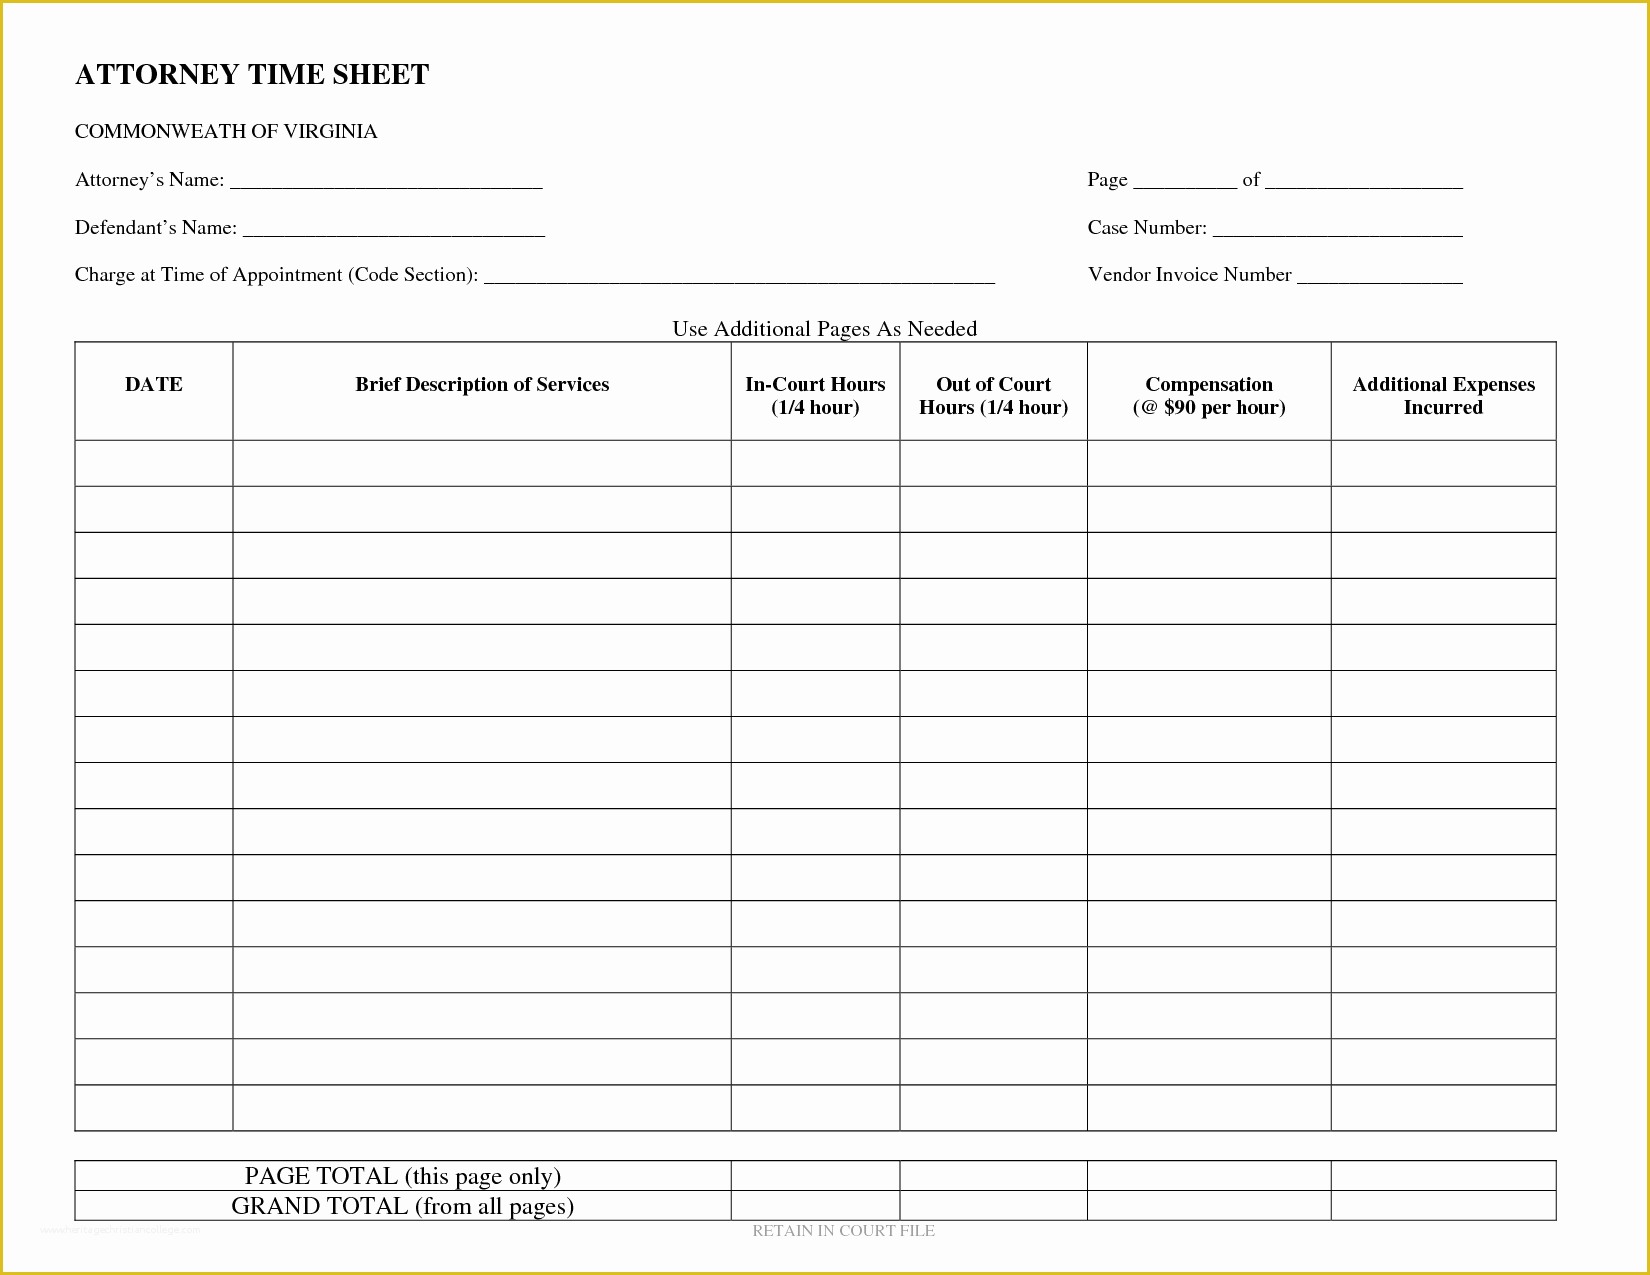 Attorney Timesheet Template Free Of Best S Of Timesheet forms In Word Time Sheets